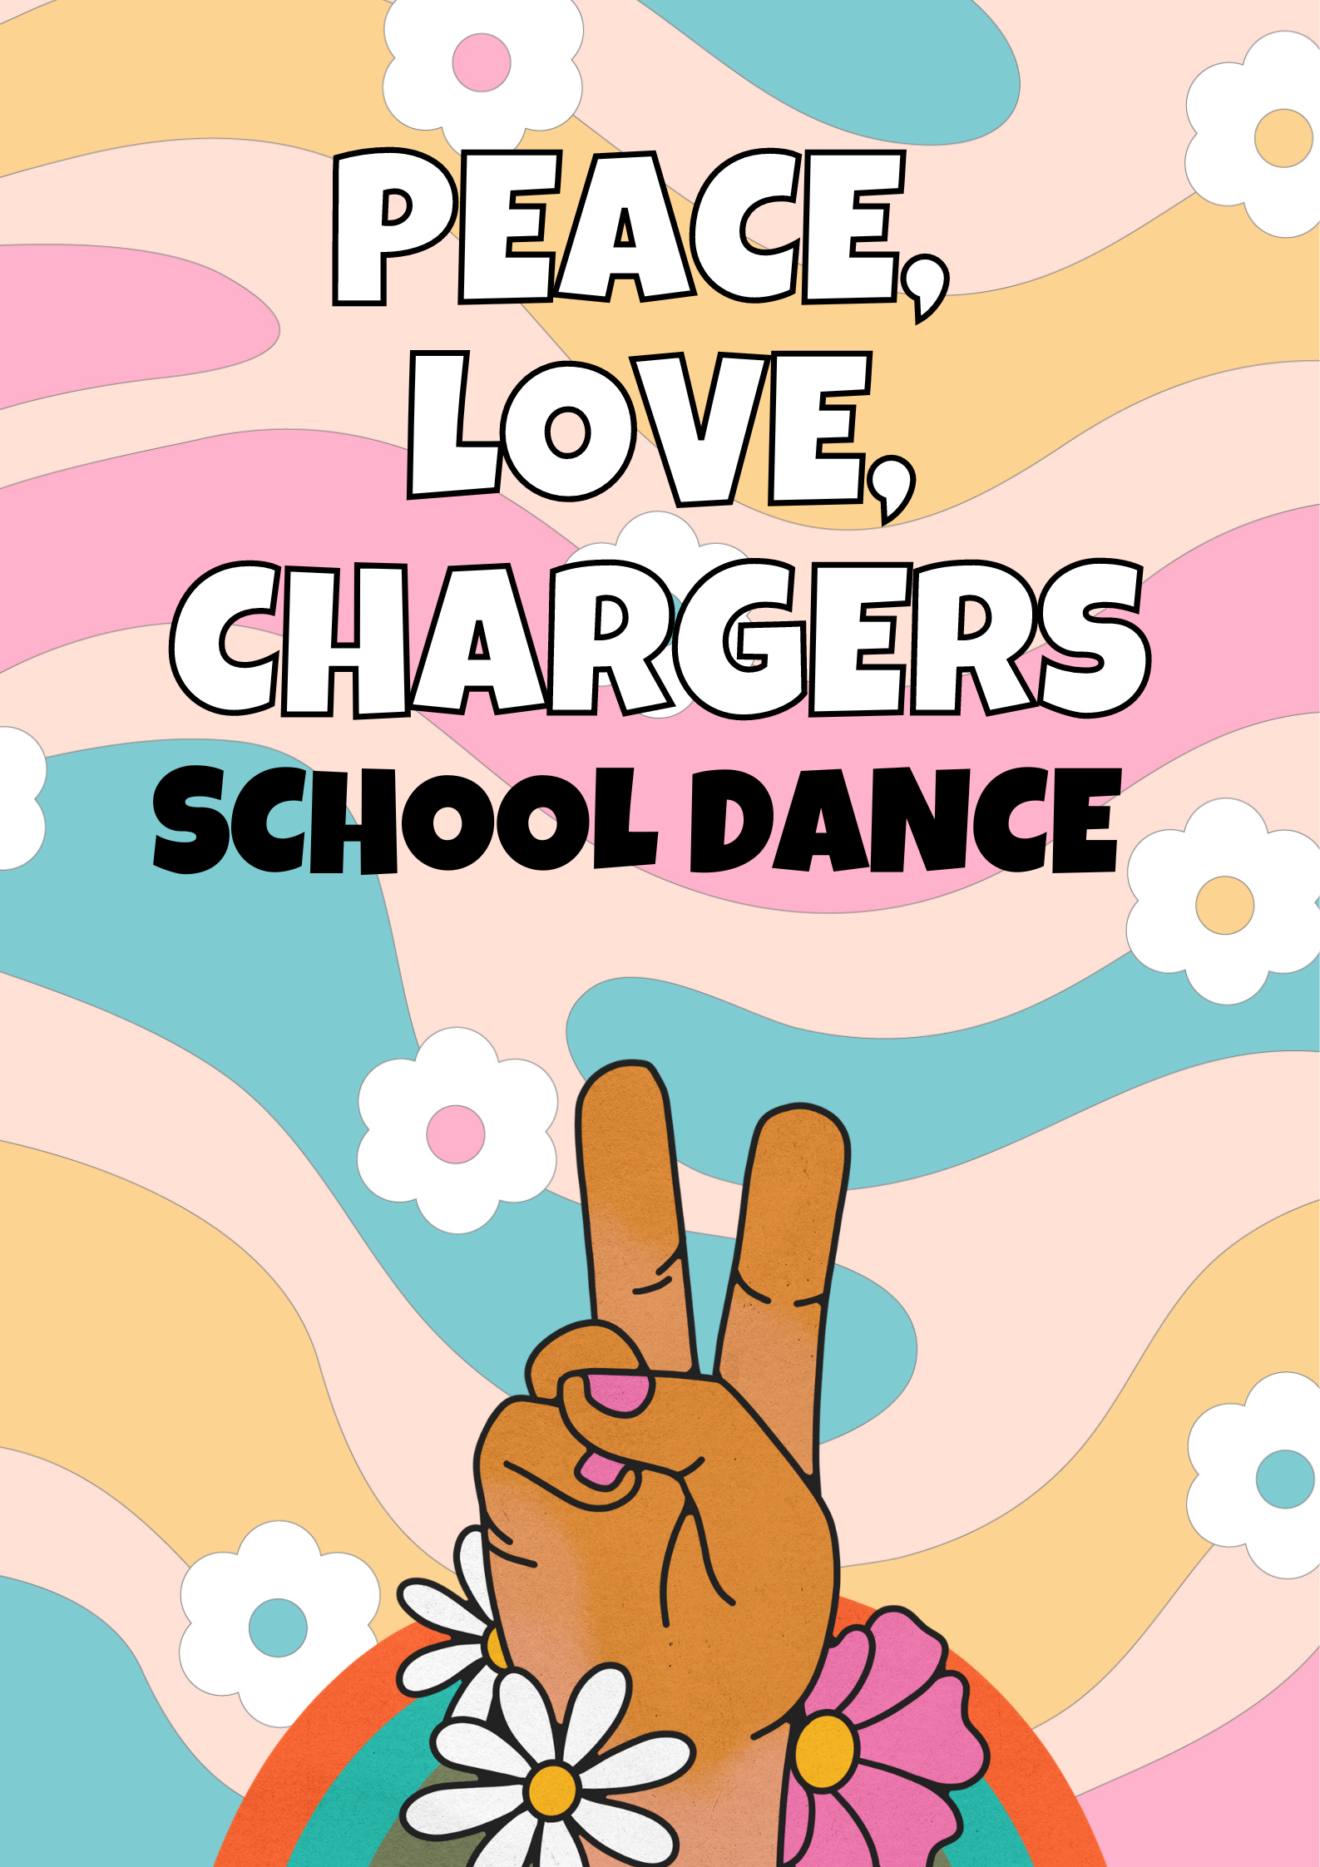 School Dance: Friday, February 9th from 6-8pm